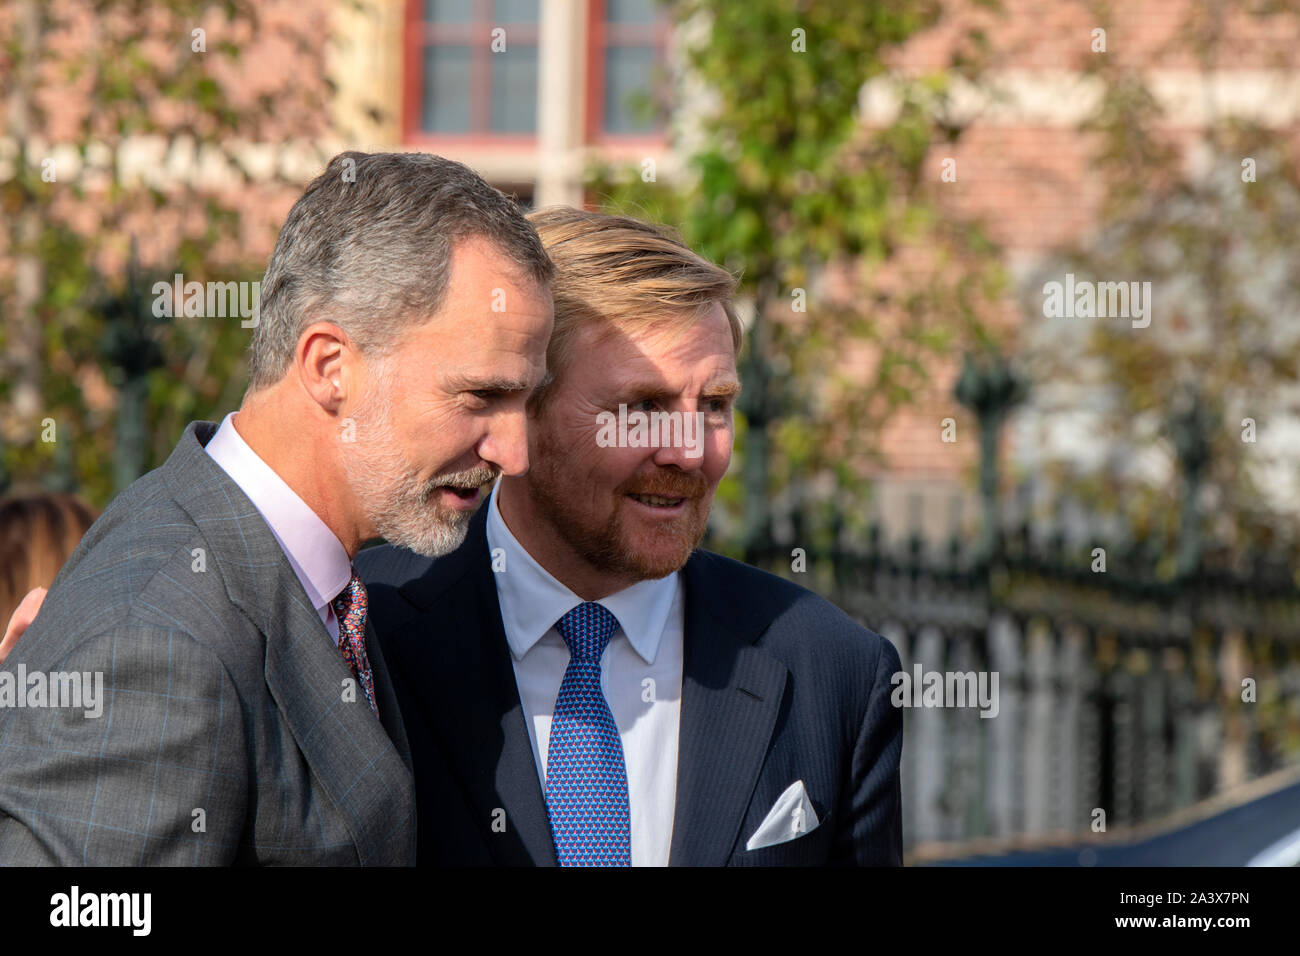 King Willem Alexander And King Felipe Saying Goodby After At The Rijksmuseum For The Rembrandt And Velázquez Exhibition At Amsterdam The Netherlands 2 Stock Photo